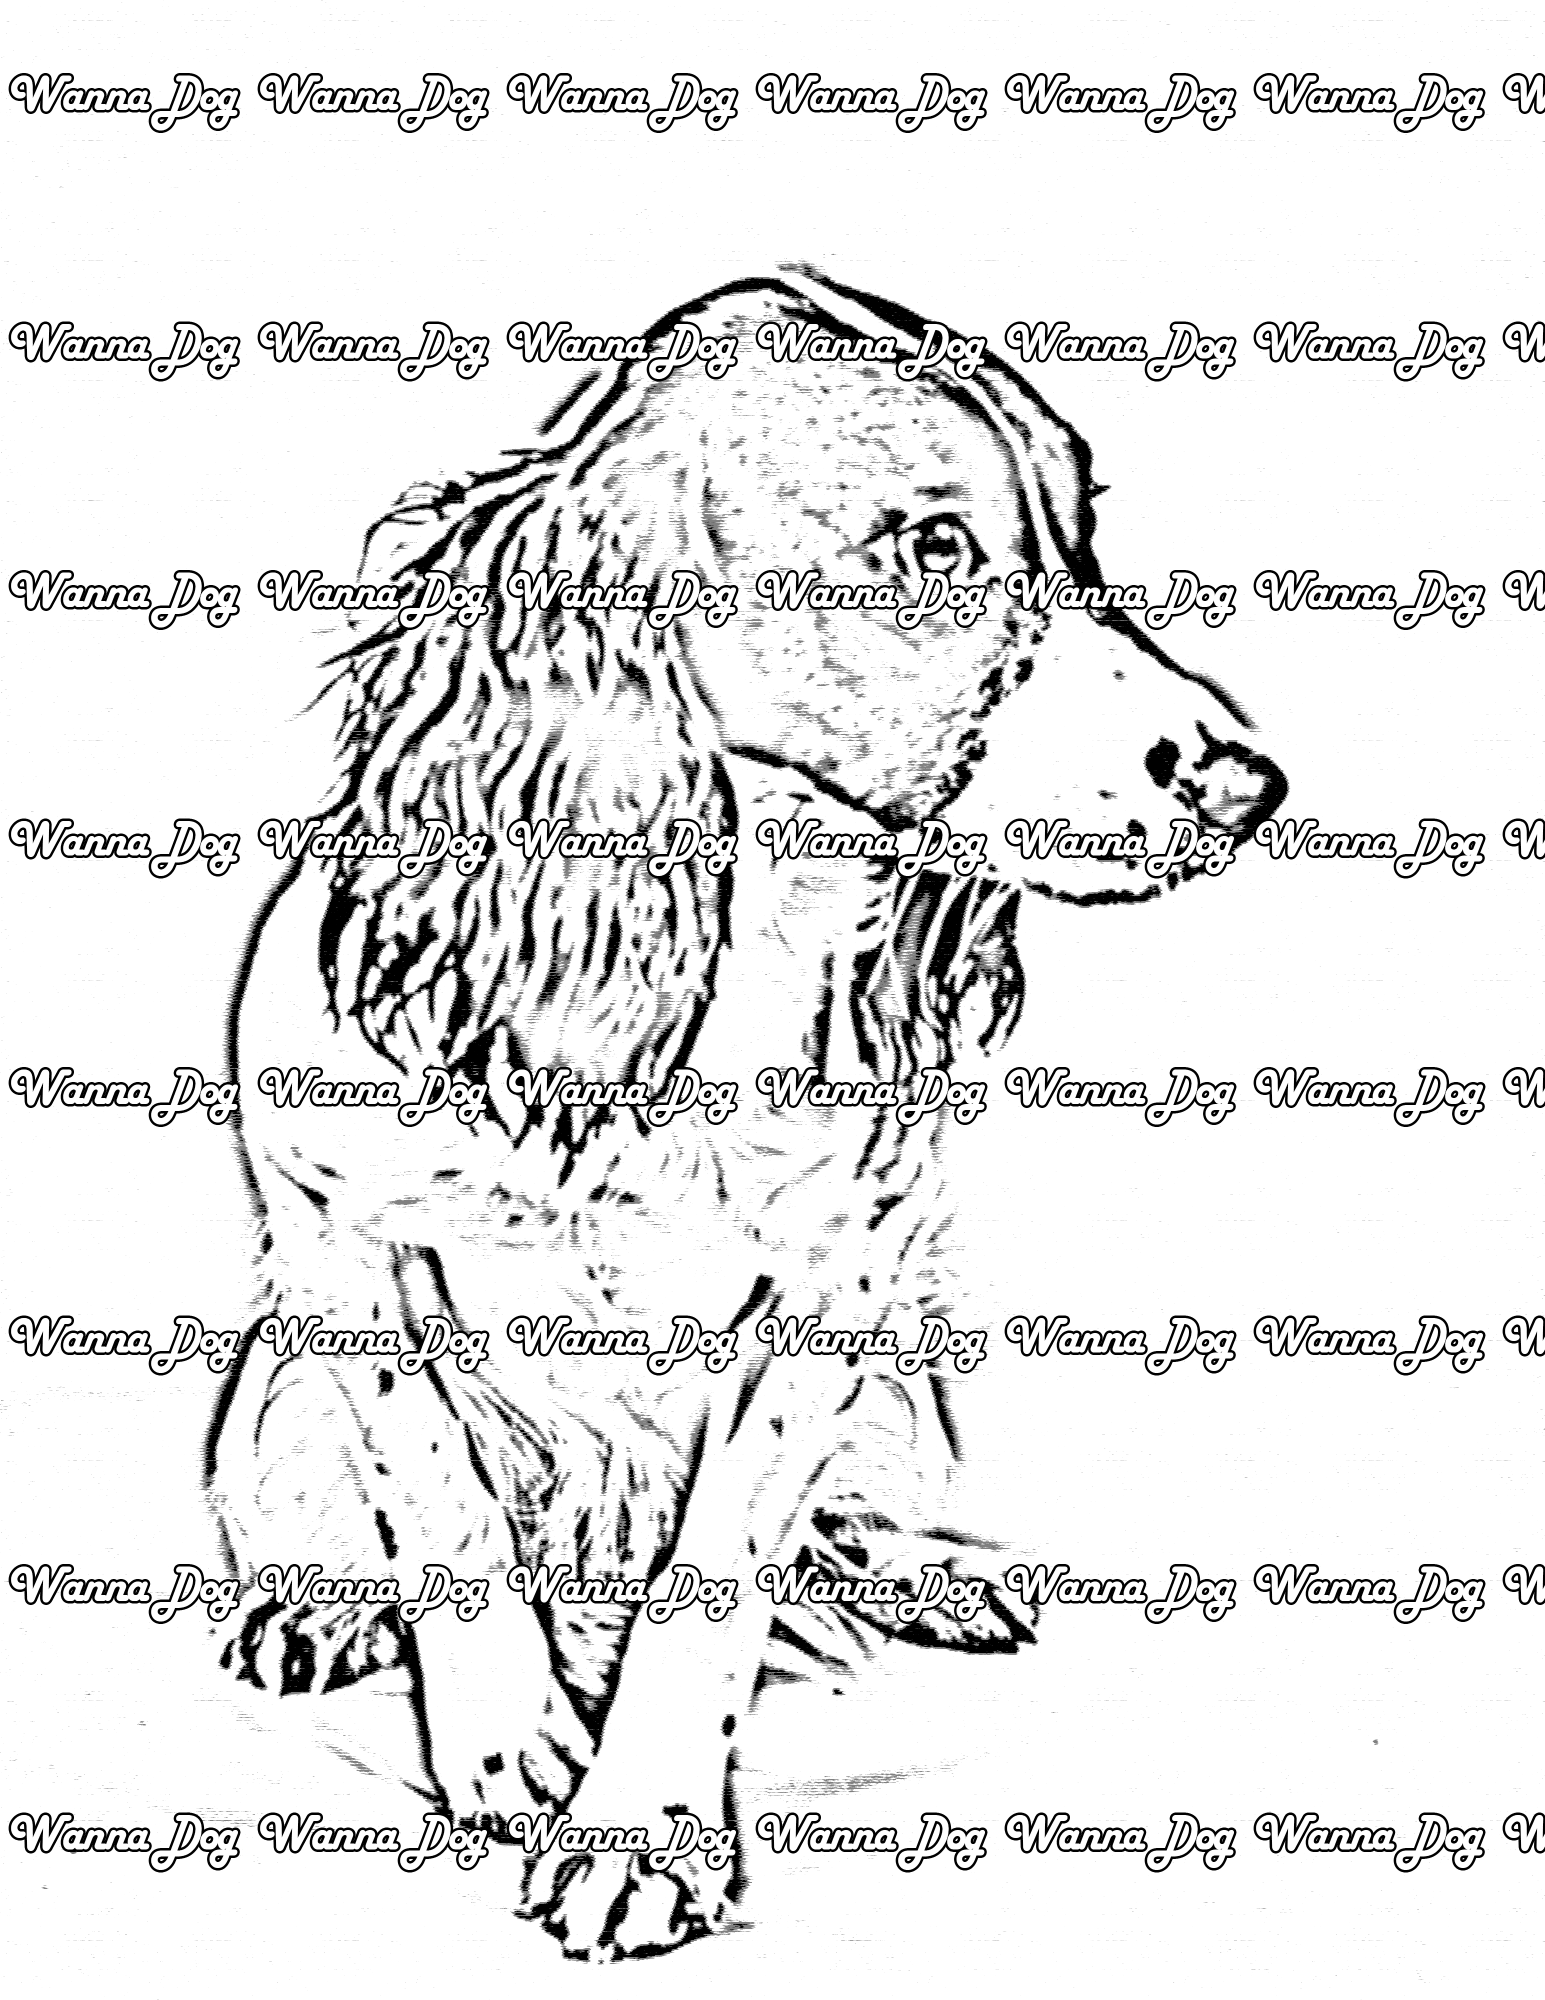 English Springer Spaniel Coloring Page of a English Springer Spaniel posing, sitting, and looking away from the camera